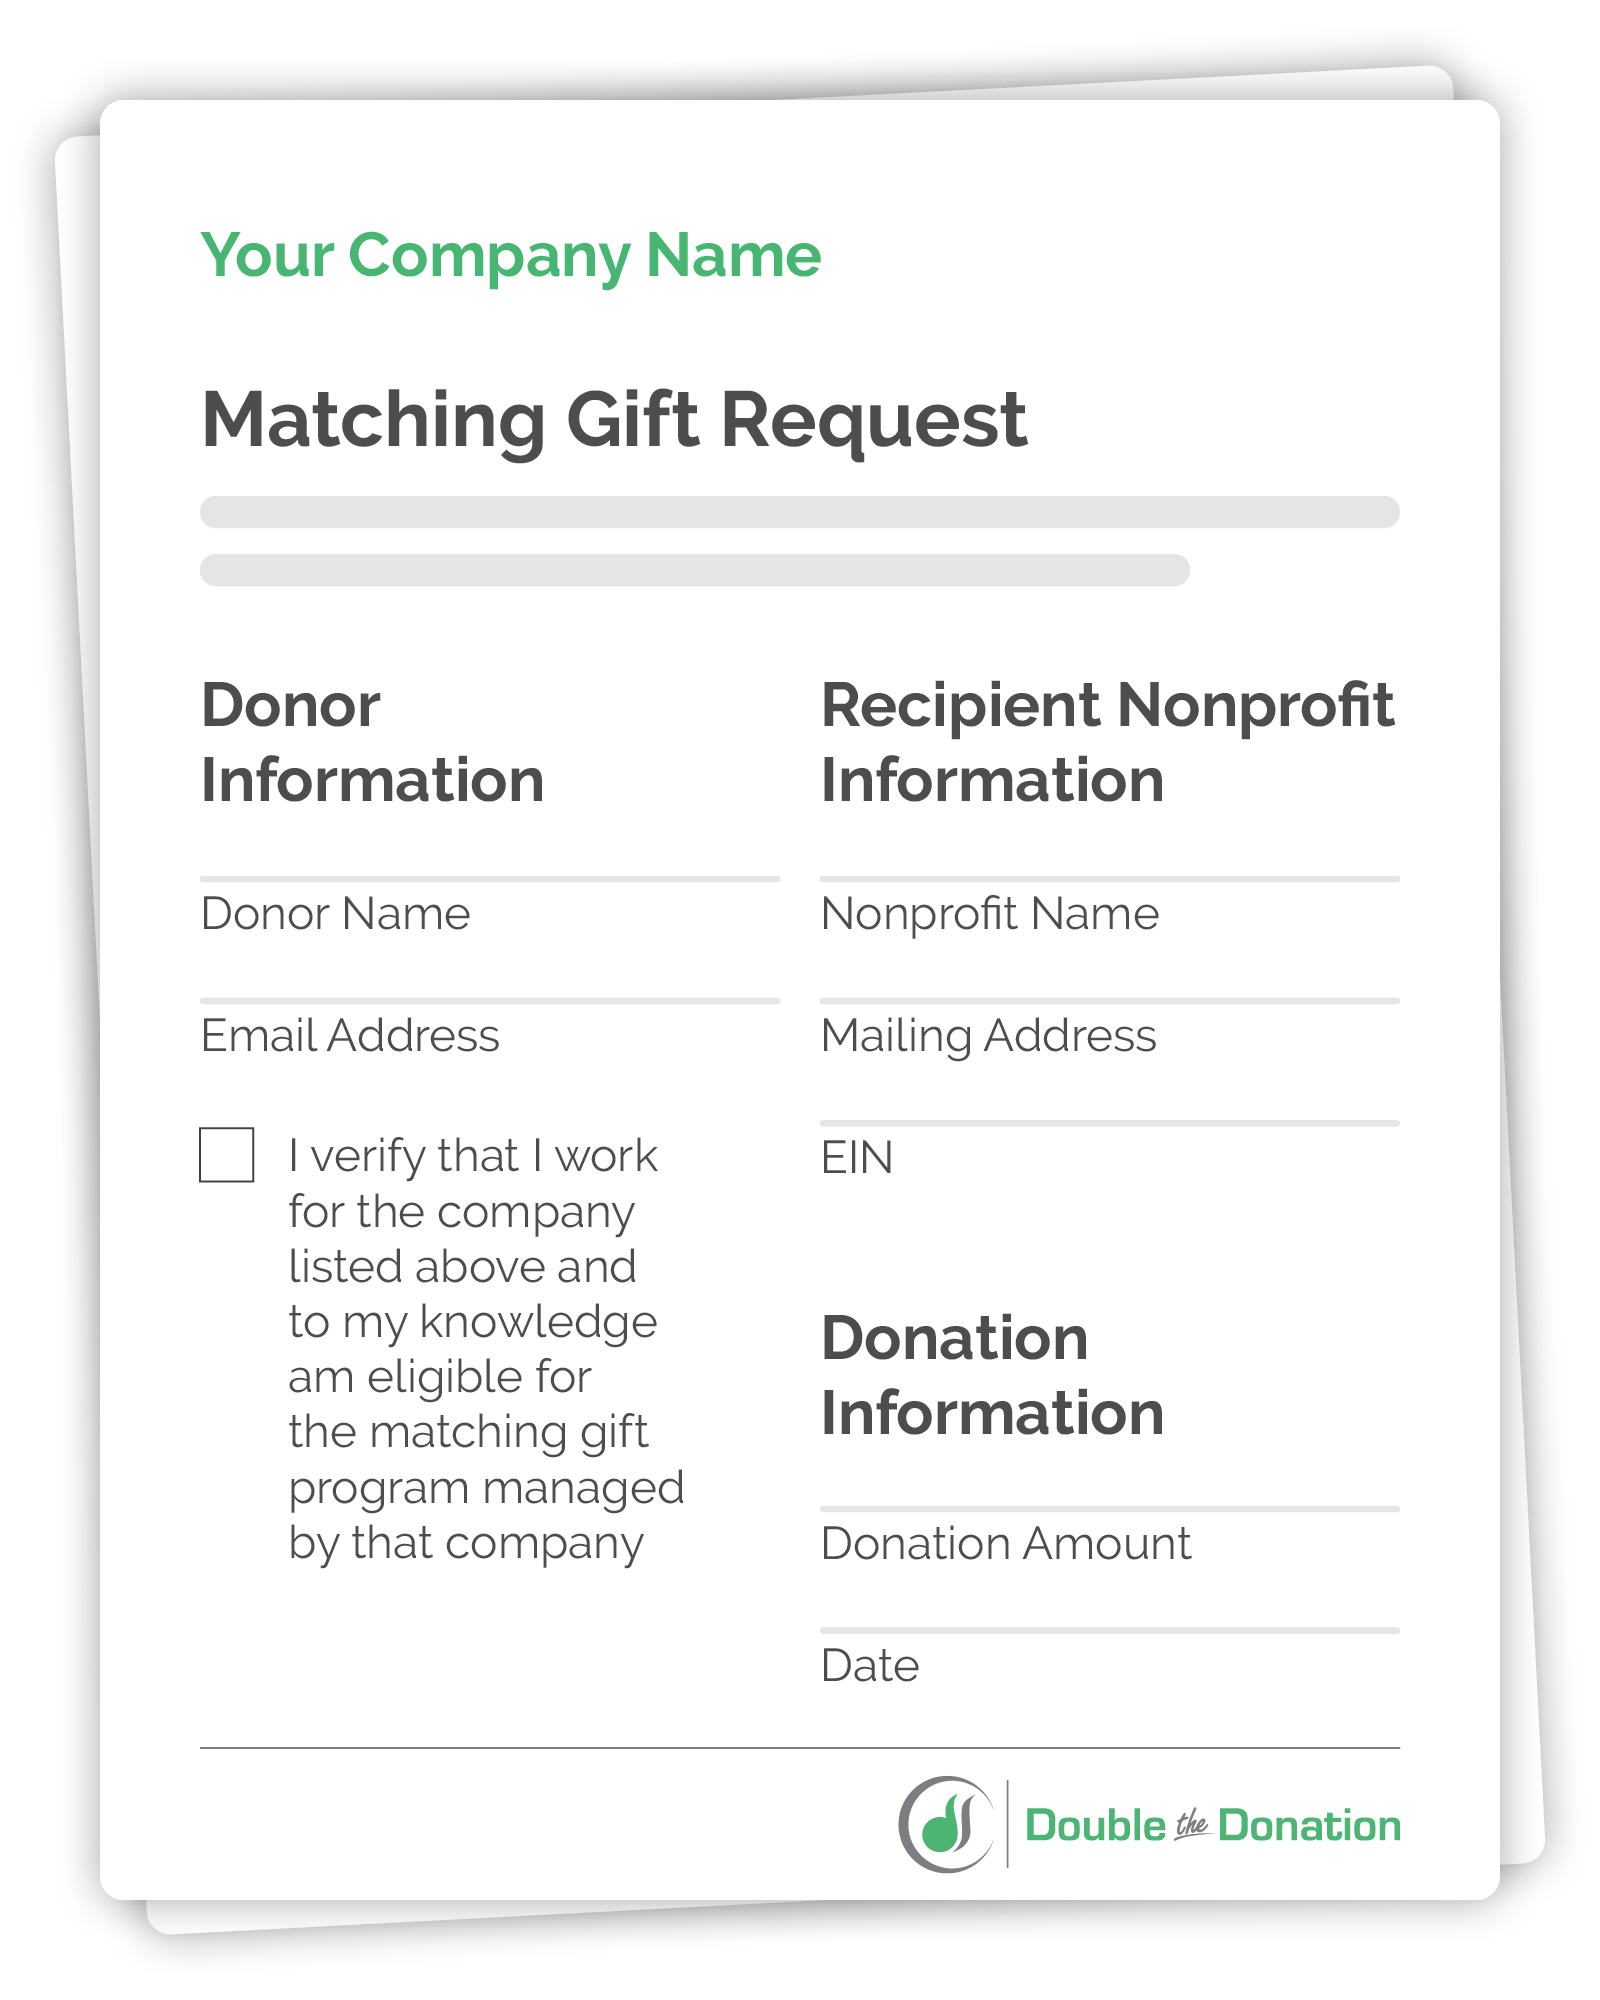 Starting a matching gift program with DTD's standard form